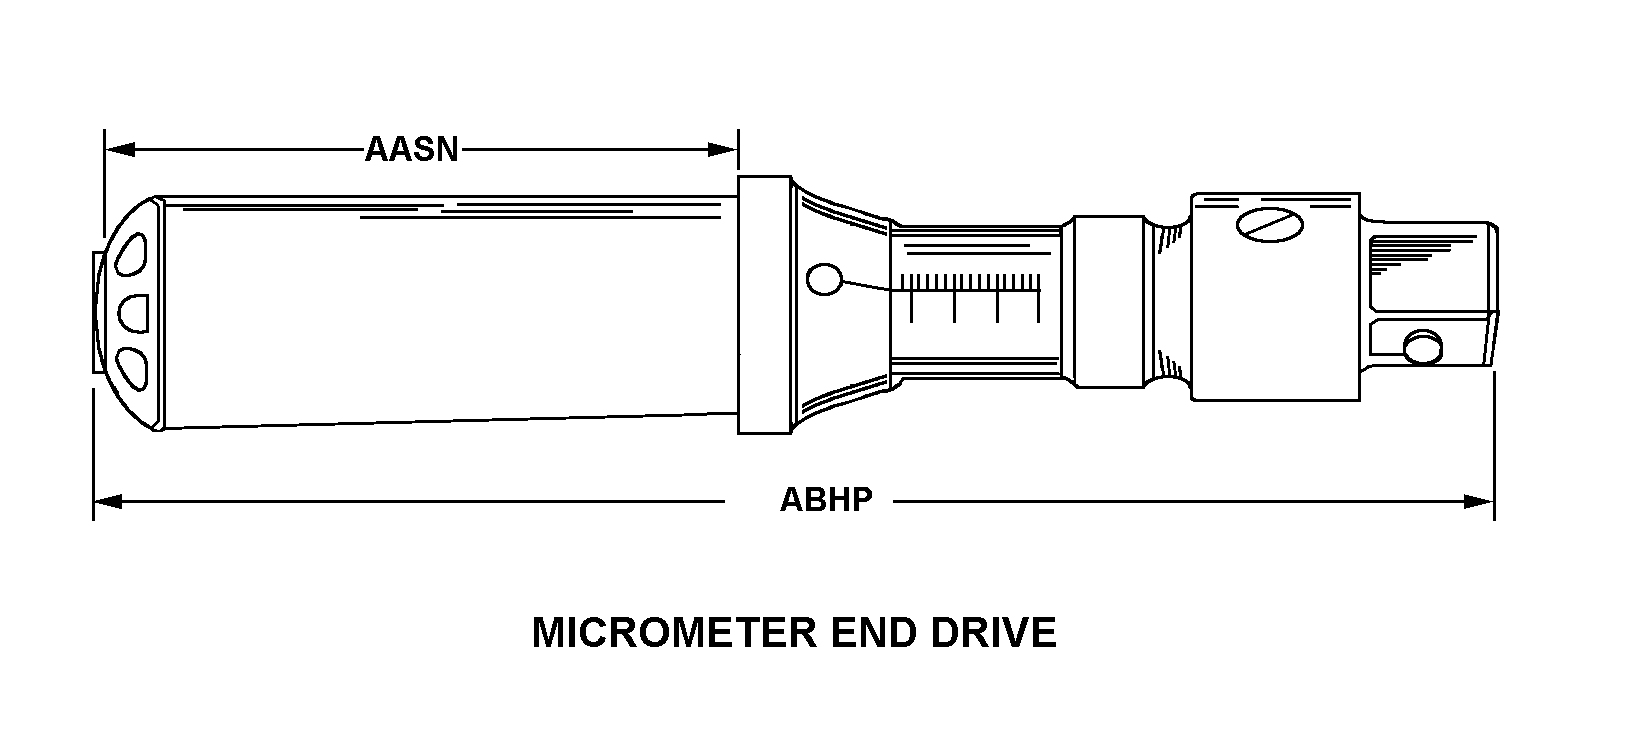 MICROMETER END DRIVE style nsn 5120-01-391-7757